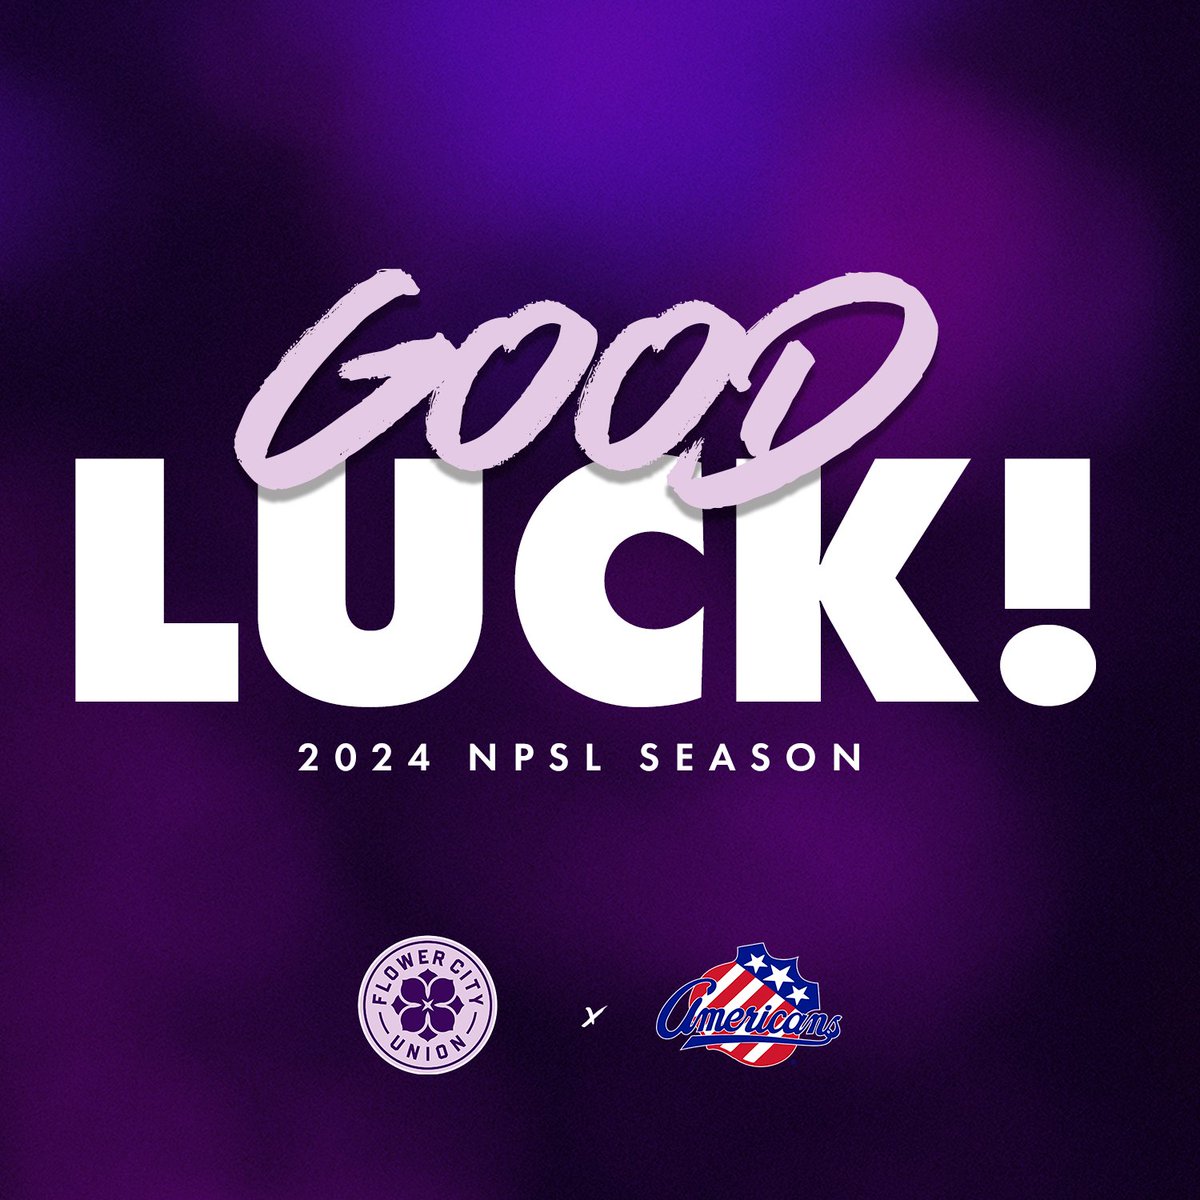 Wishing the best of luck to our friends at the @FlowerCityUnion today as they open the 2024 NPSL season!

We'll be rooting for you all summer long 👊